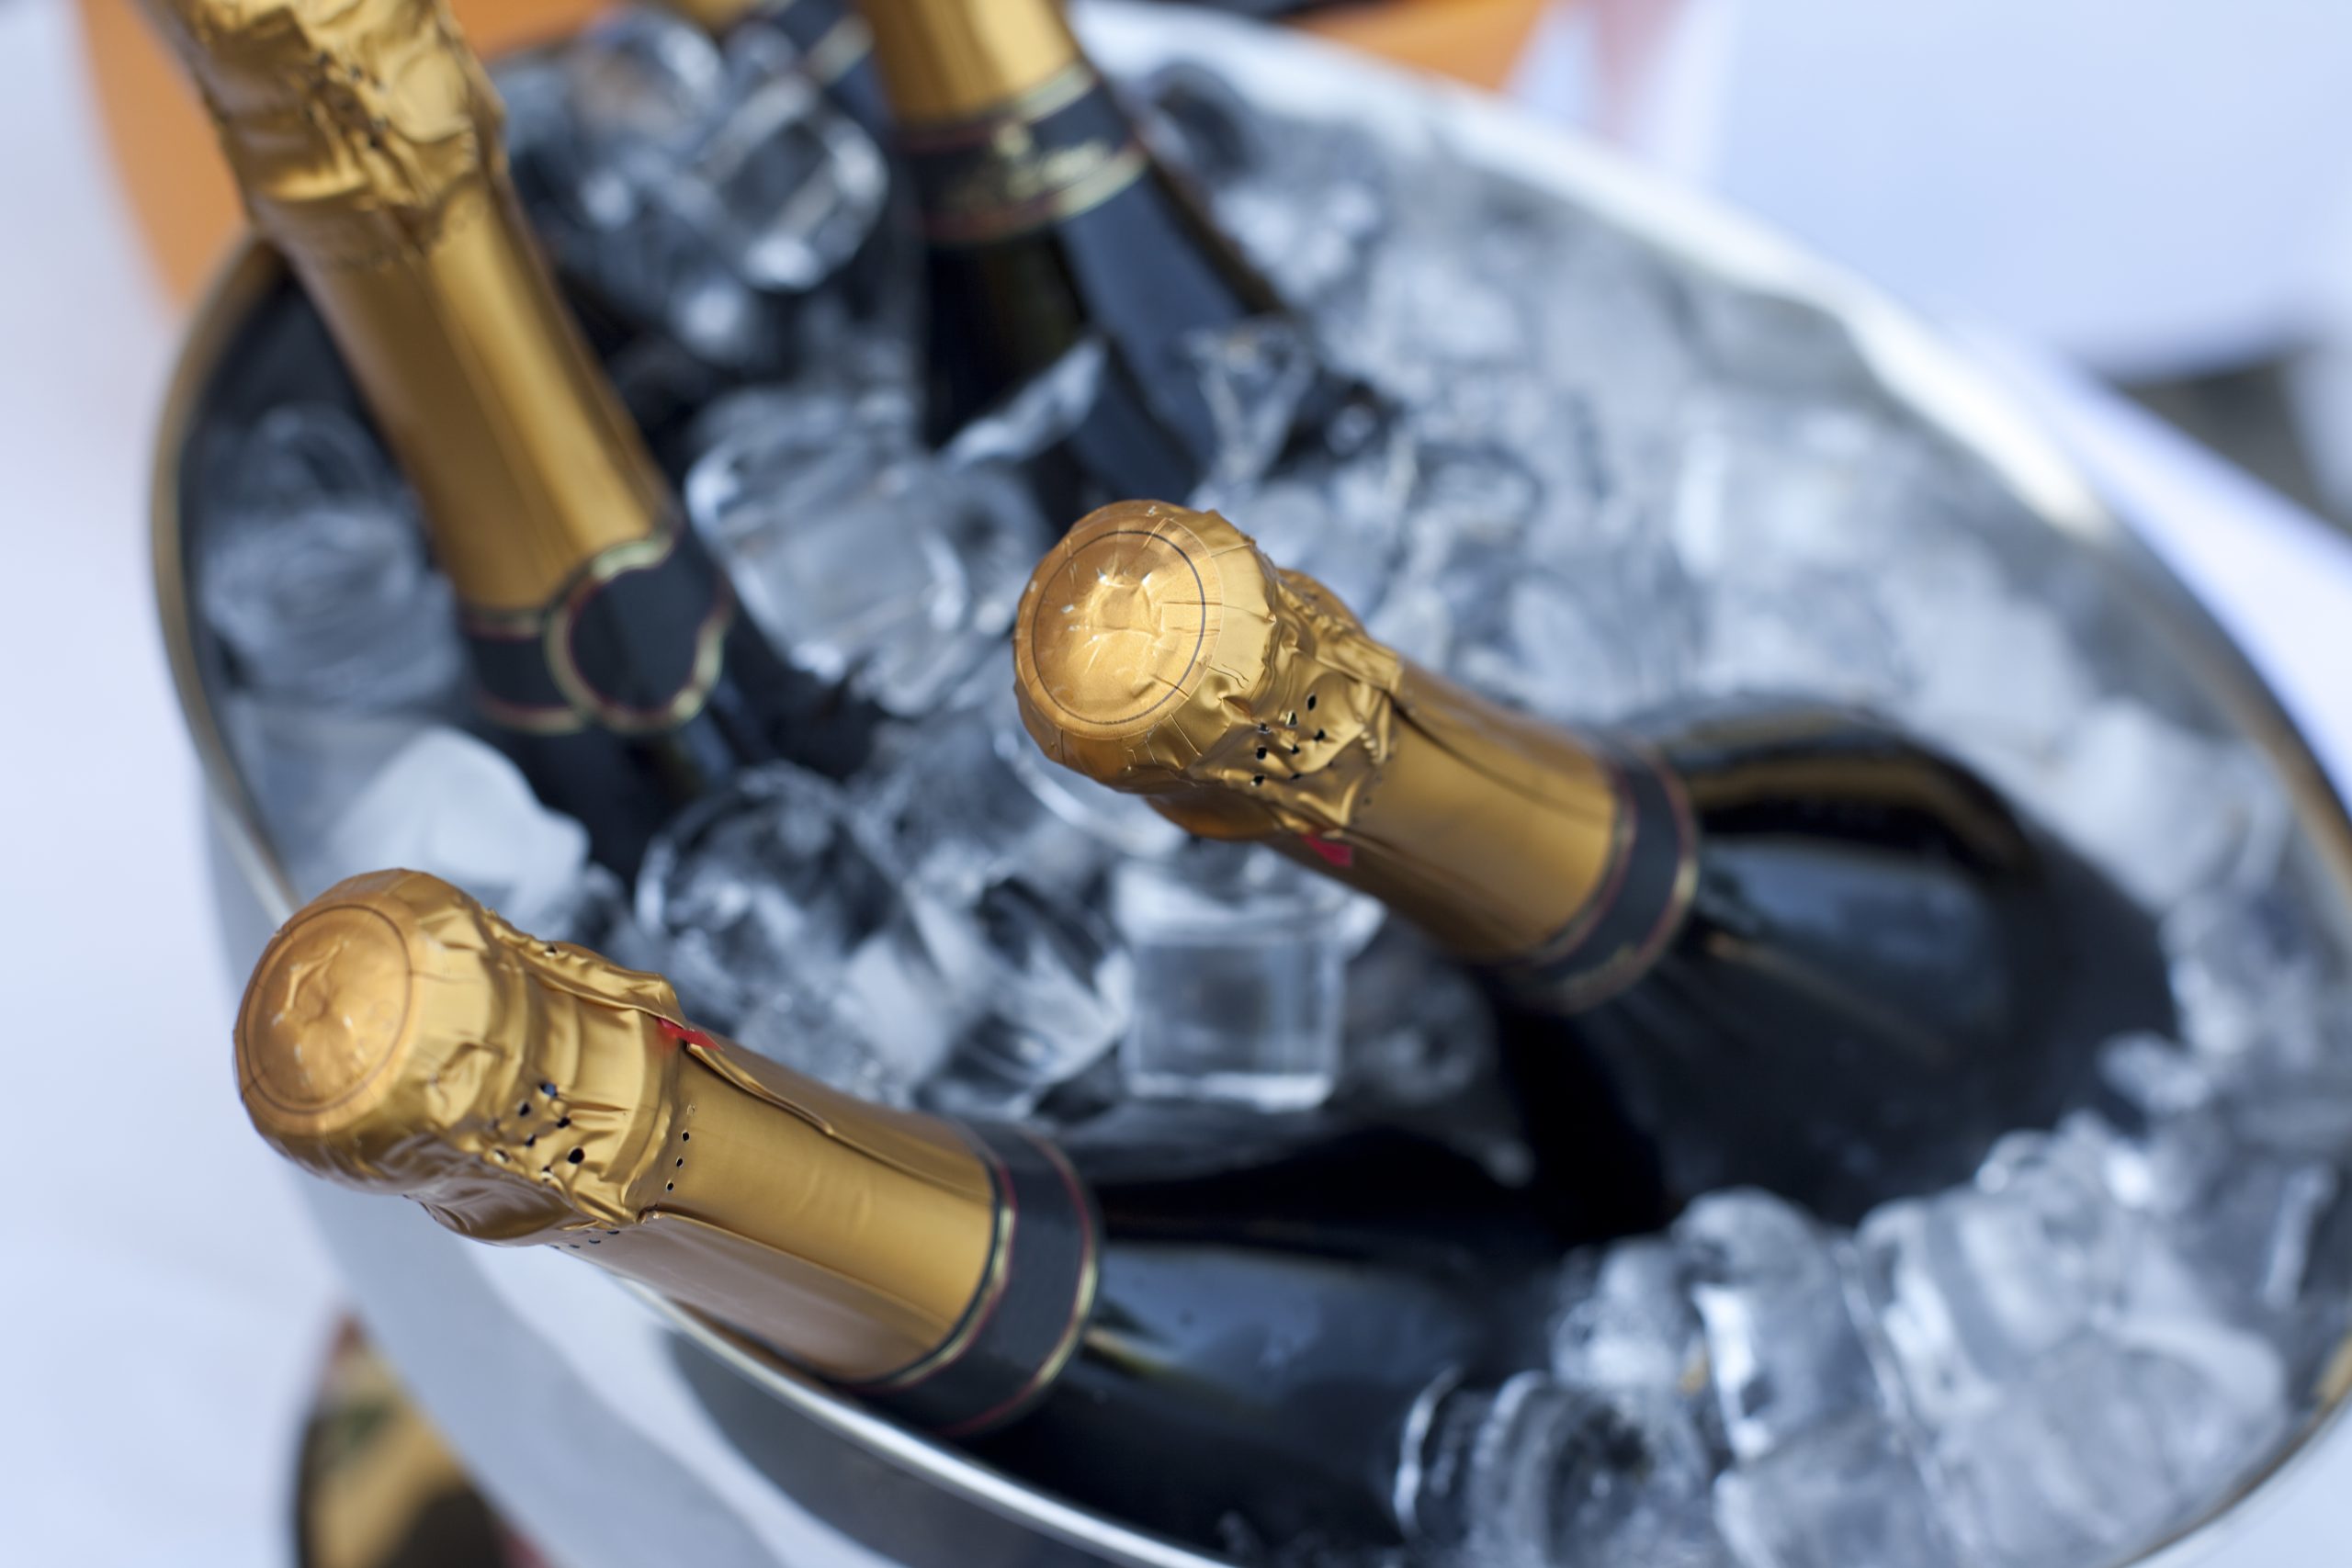 Top 10 most expensive Champagnes in the world (Record)